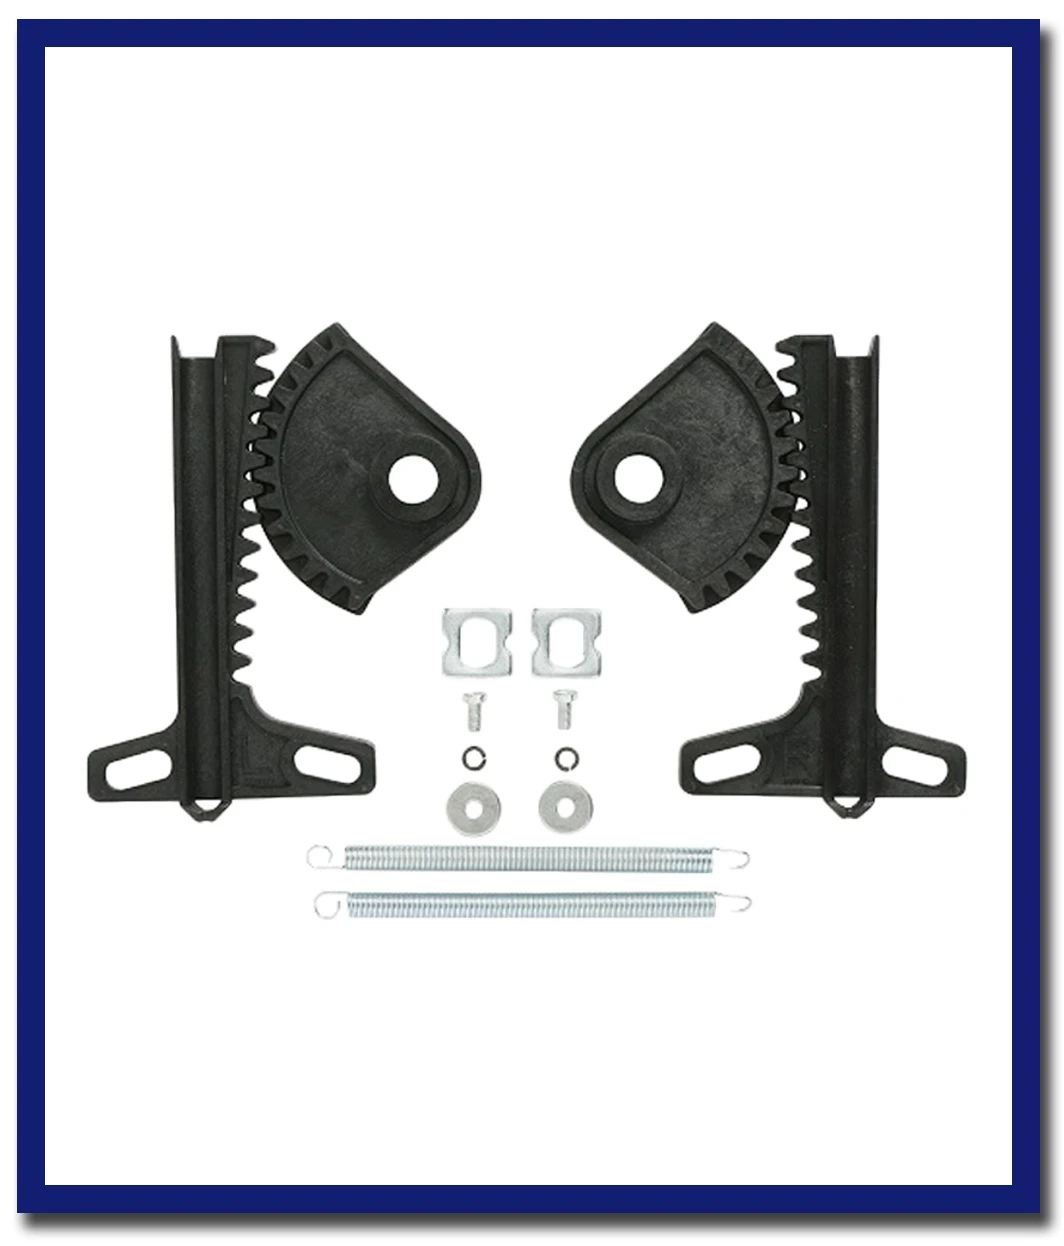 Edco Enduro Press Bucket Replacement Gears & Spring (1 Set) - Stone Doctor Australia - Cleaning Accessories > Bucket > Spare Parts